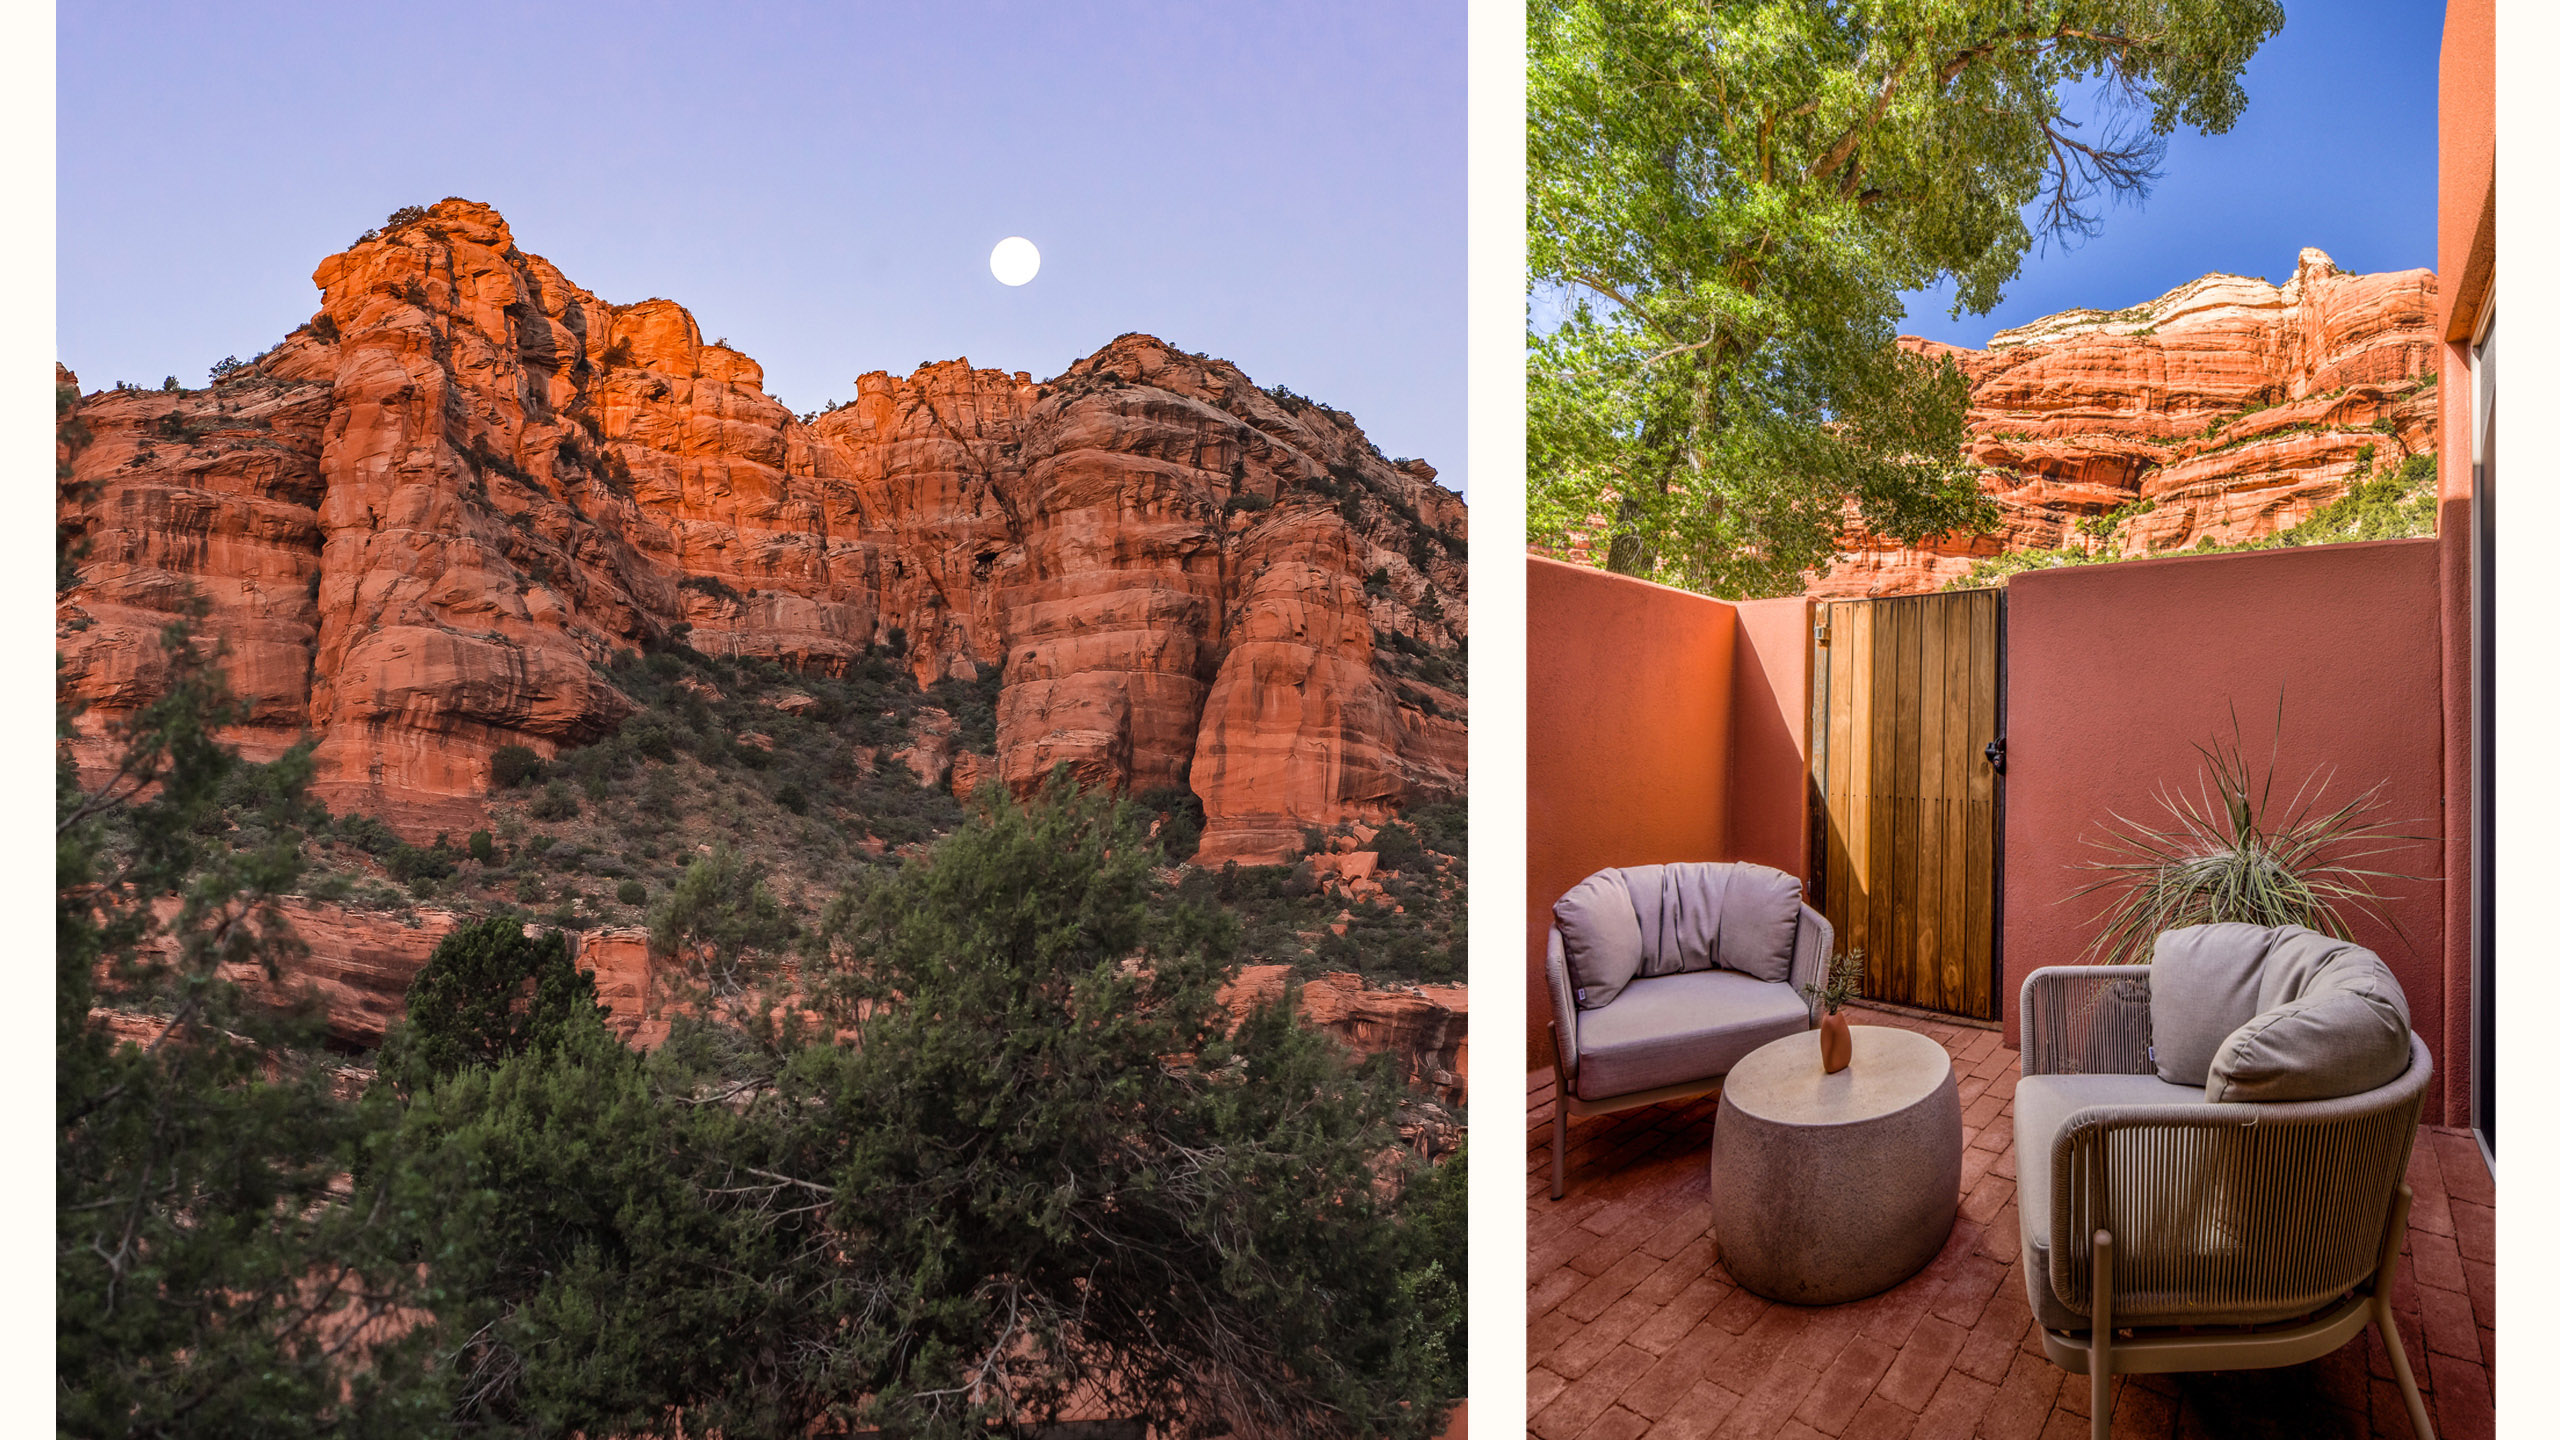 Casita Double Queen Terrace and image of Moon over the red rocks in Boynton Canyon